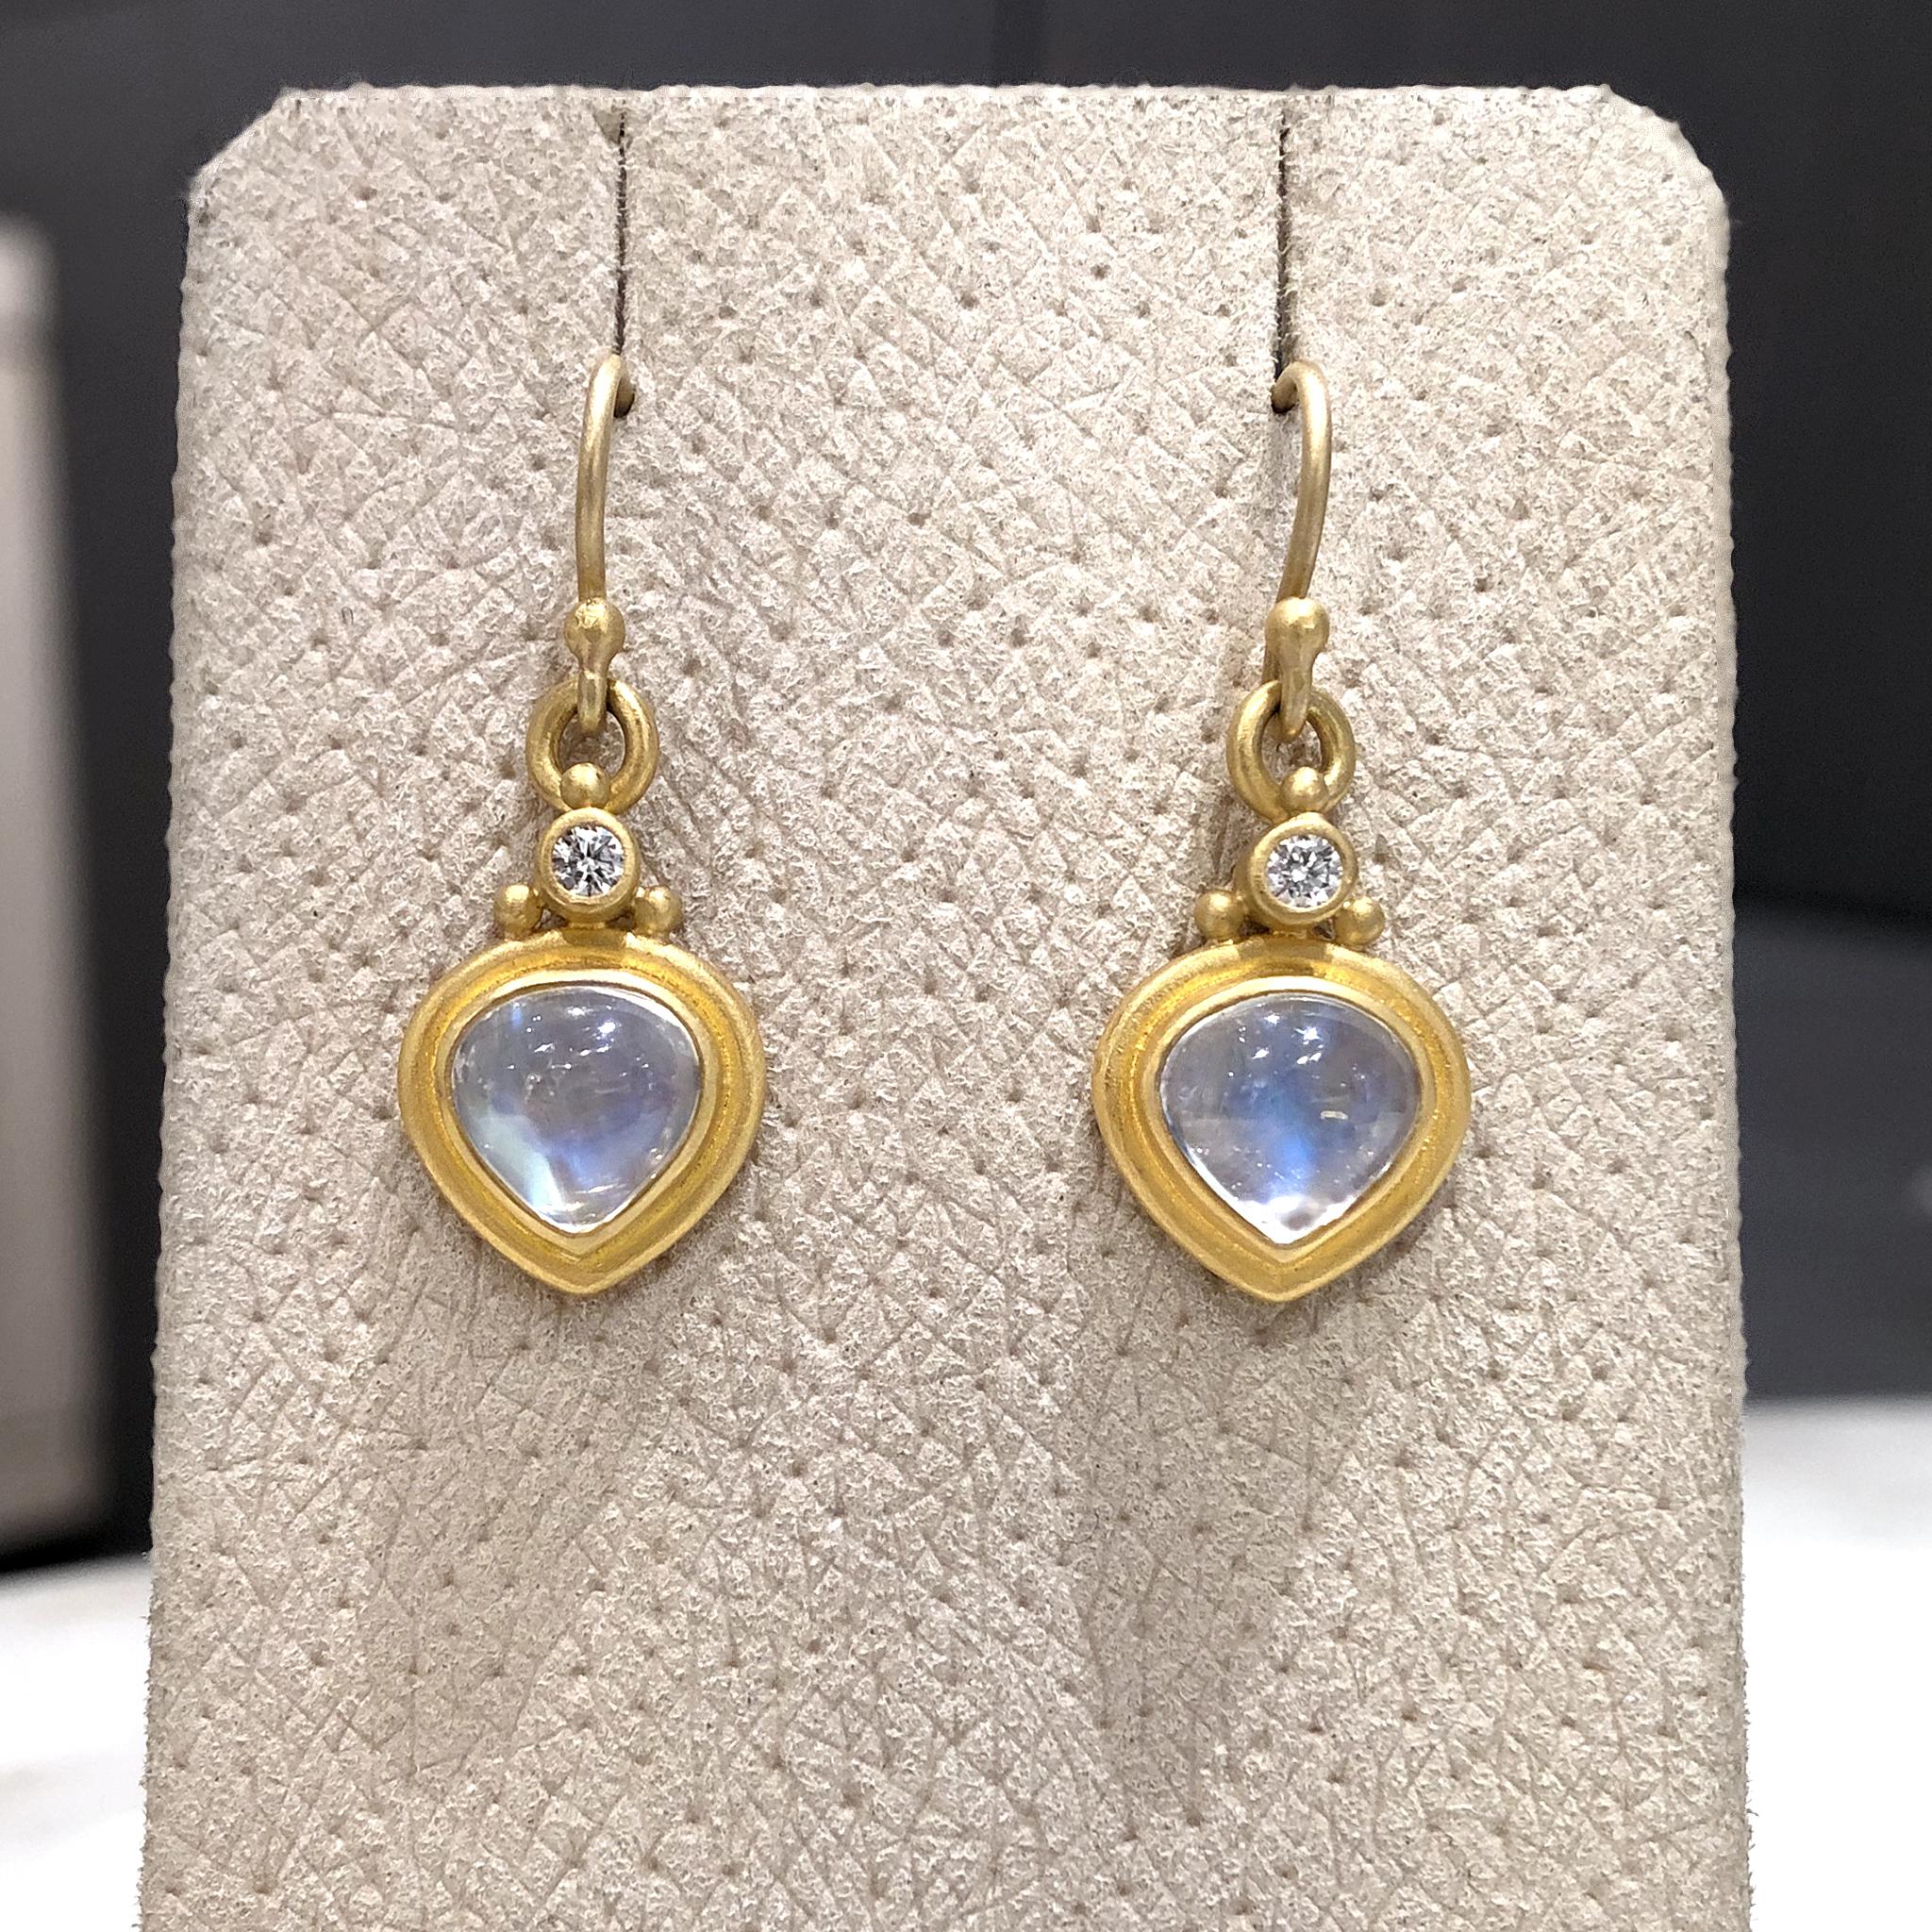 One of a Kind Drop Earrings hadcrafted by jewelry maker Denise Betesh featuring a matched pair of sensation blue moonstone tabiz cabochons totaling 3.50 carats framed in the artist's signature matte-finished 22k yellow gold accented with 0.10 total